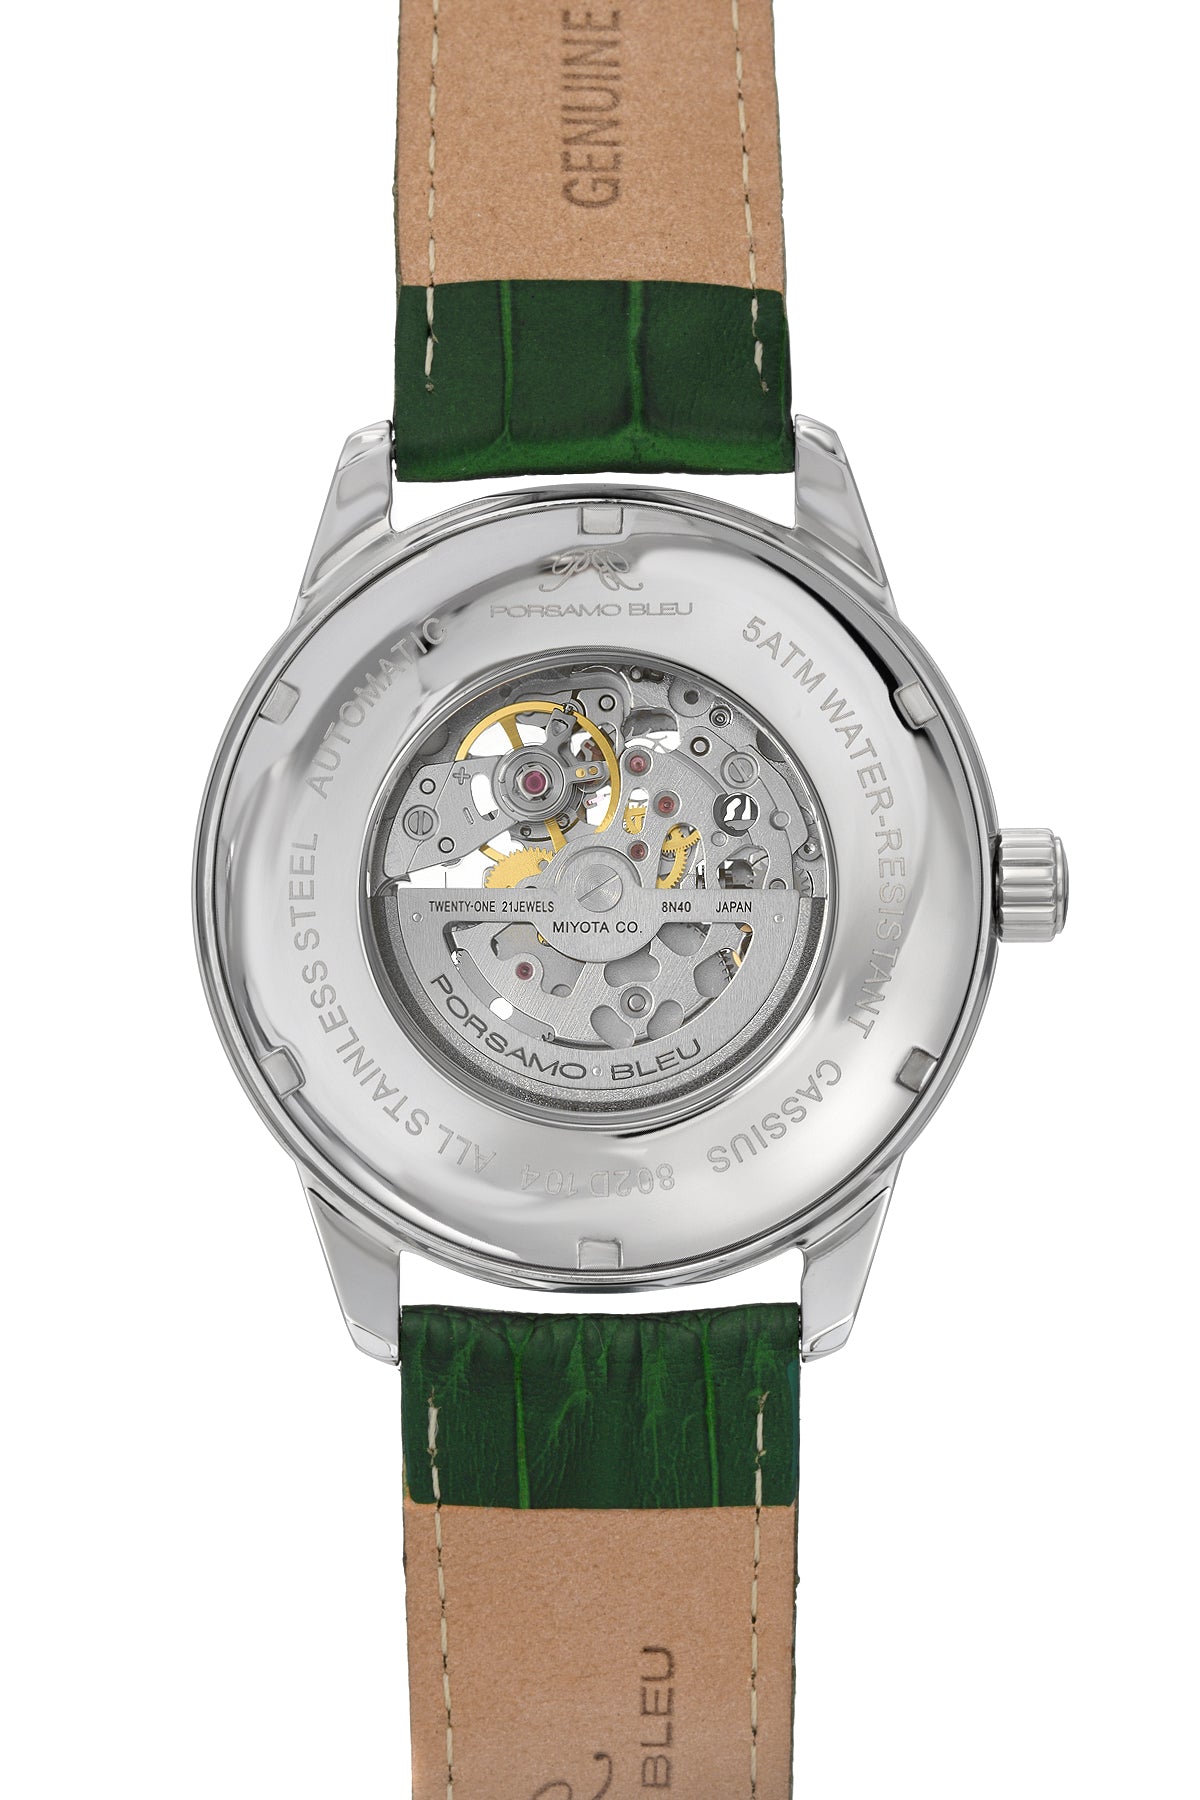 Porsamo Bleu Cassius luxury automatic men's watch, genuine leather band, silver, green 802DCAL